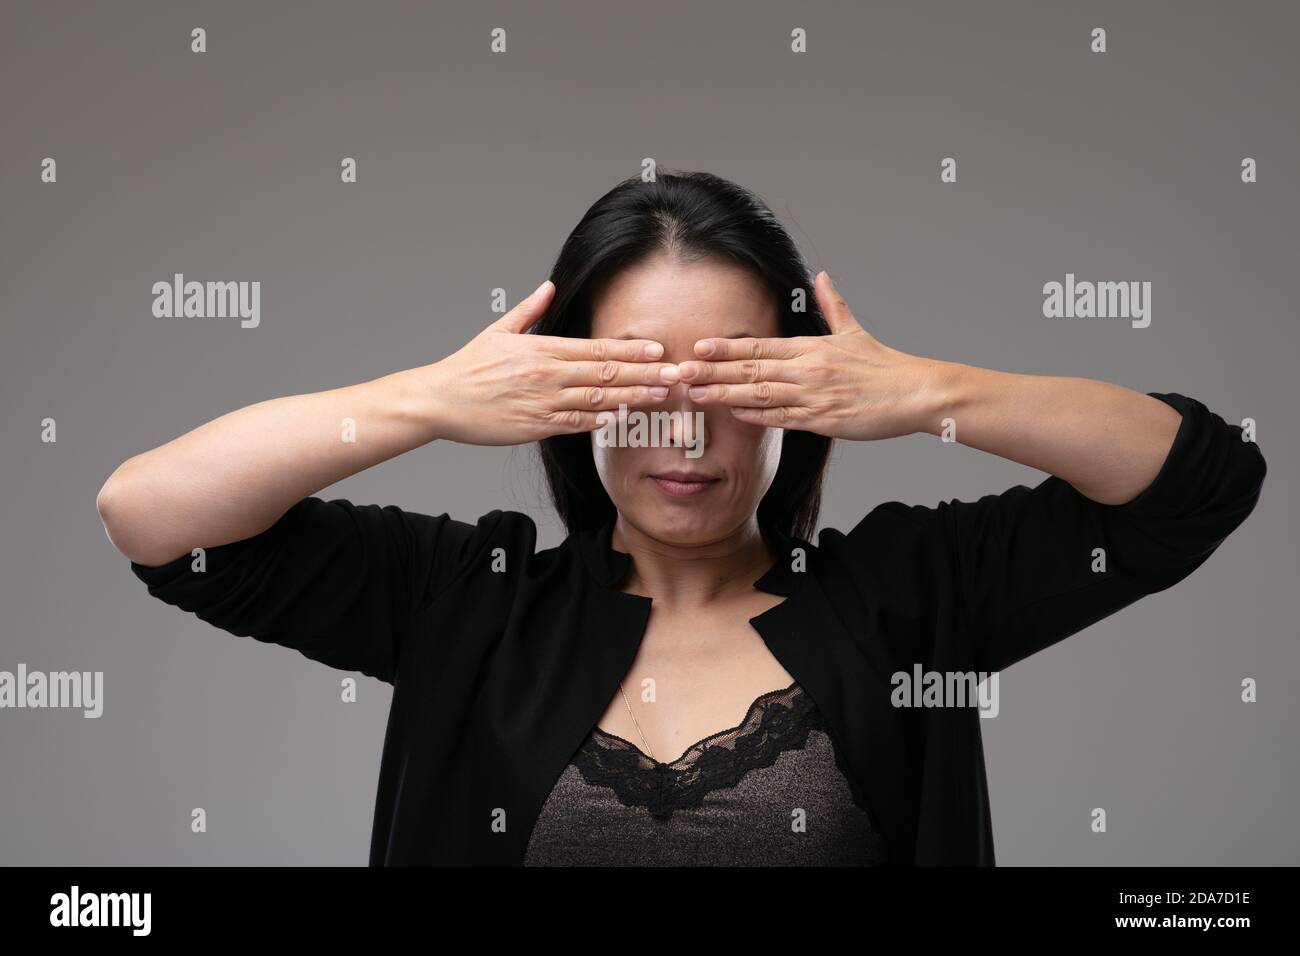 Asian woman in a smart black outfit covering her yes with her hands in a concept of the metaphor see no evil, hear no evil speak no evil, over a grey Stock Photo